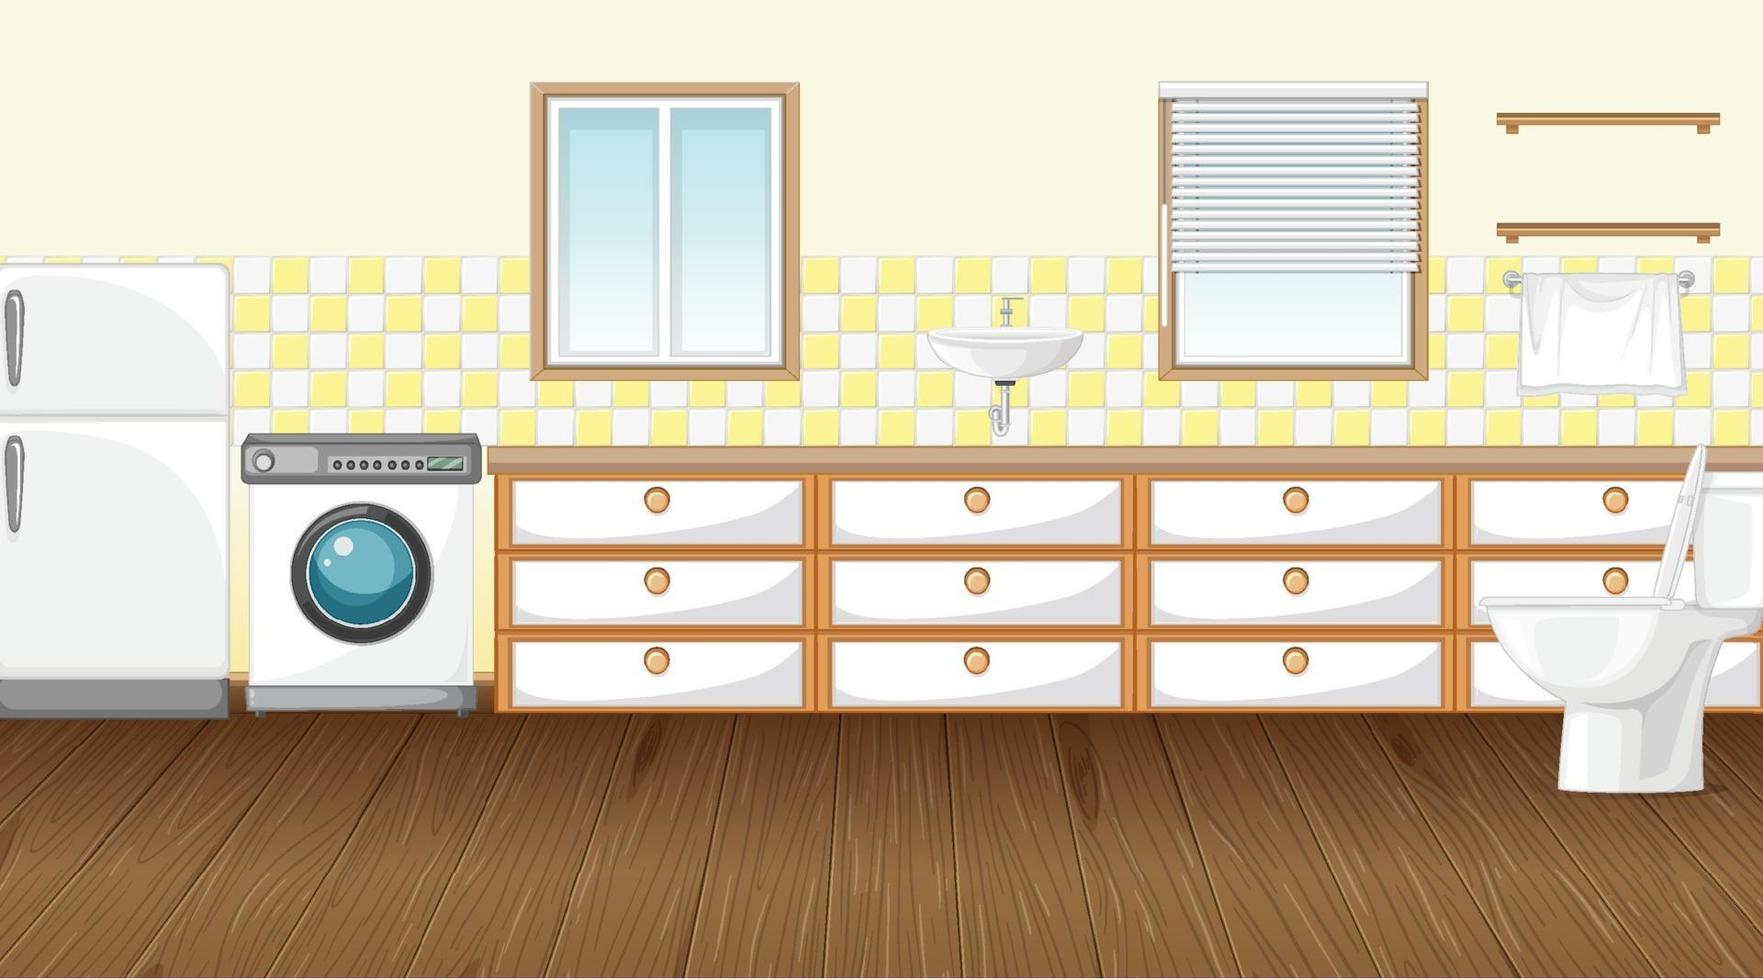 Empty scene with washing machine and refrigerator in the toilet vector